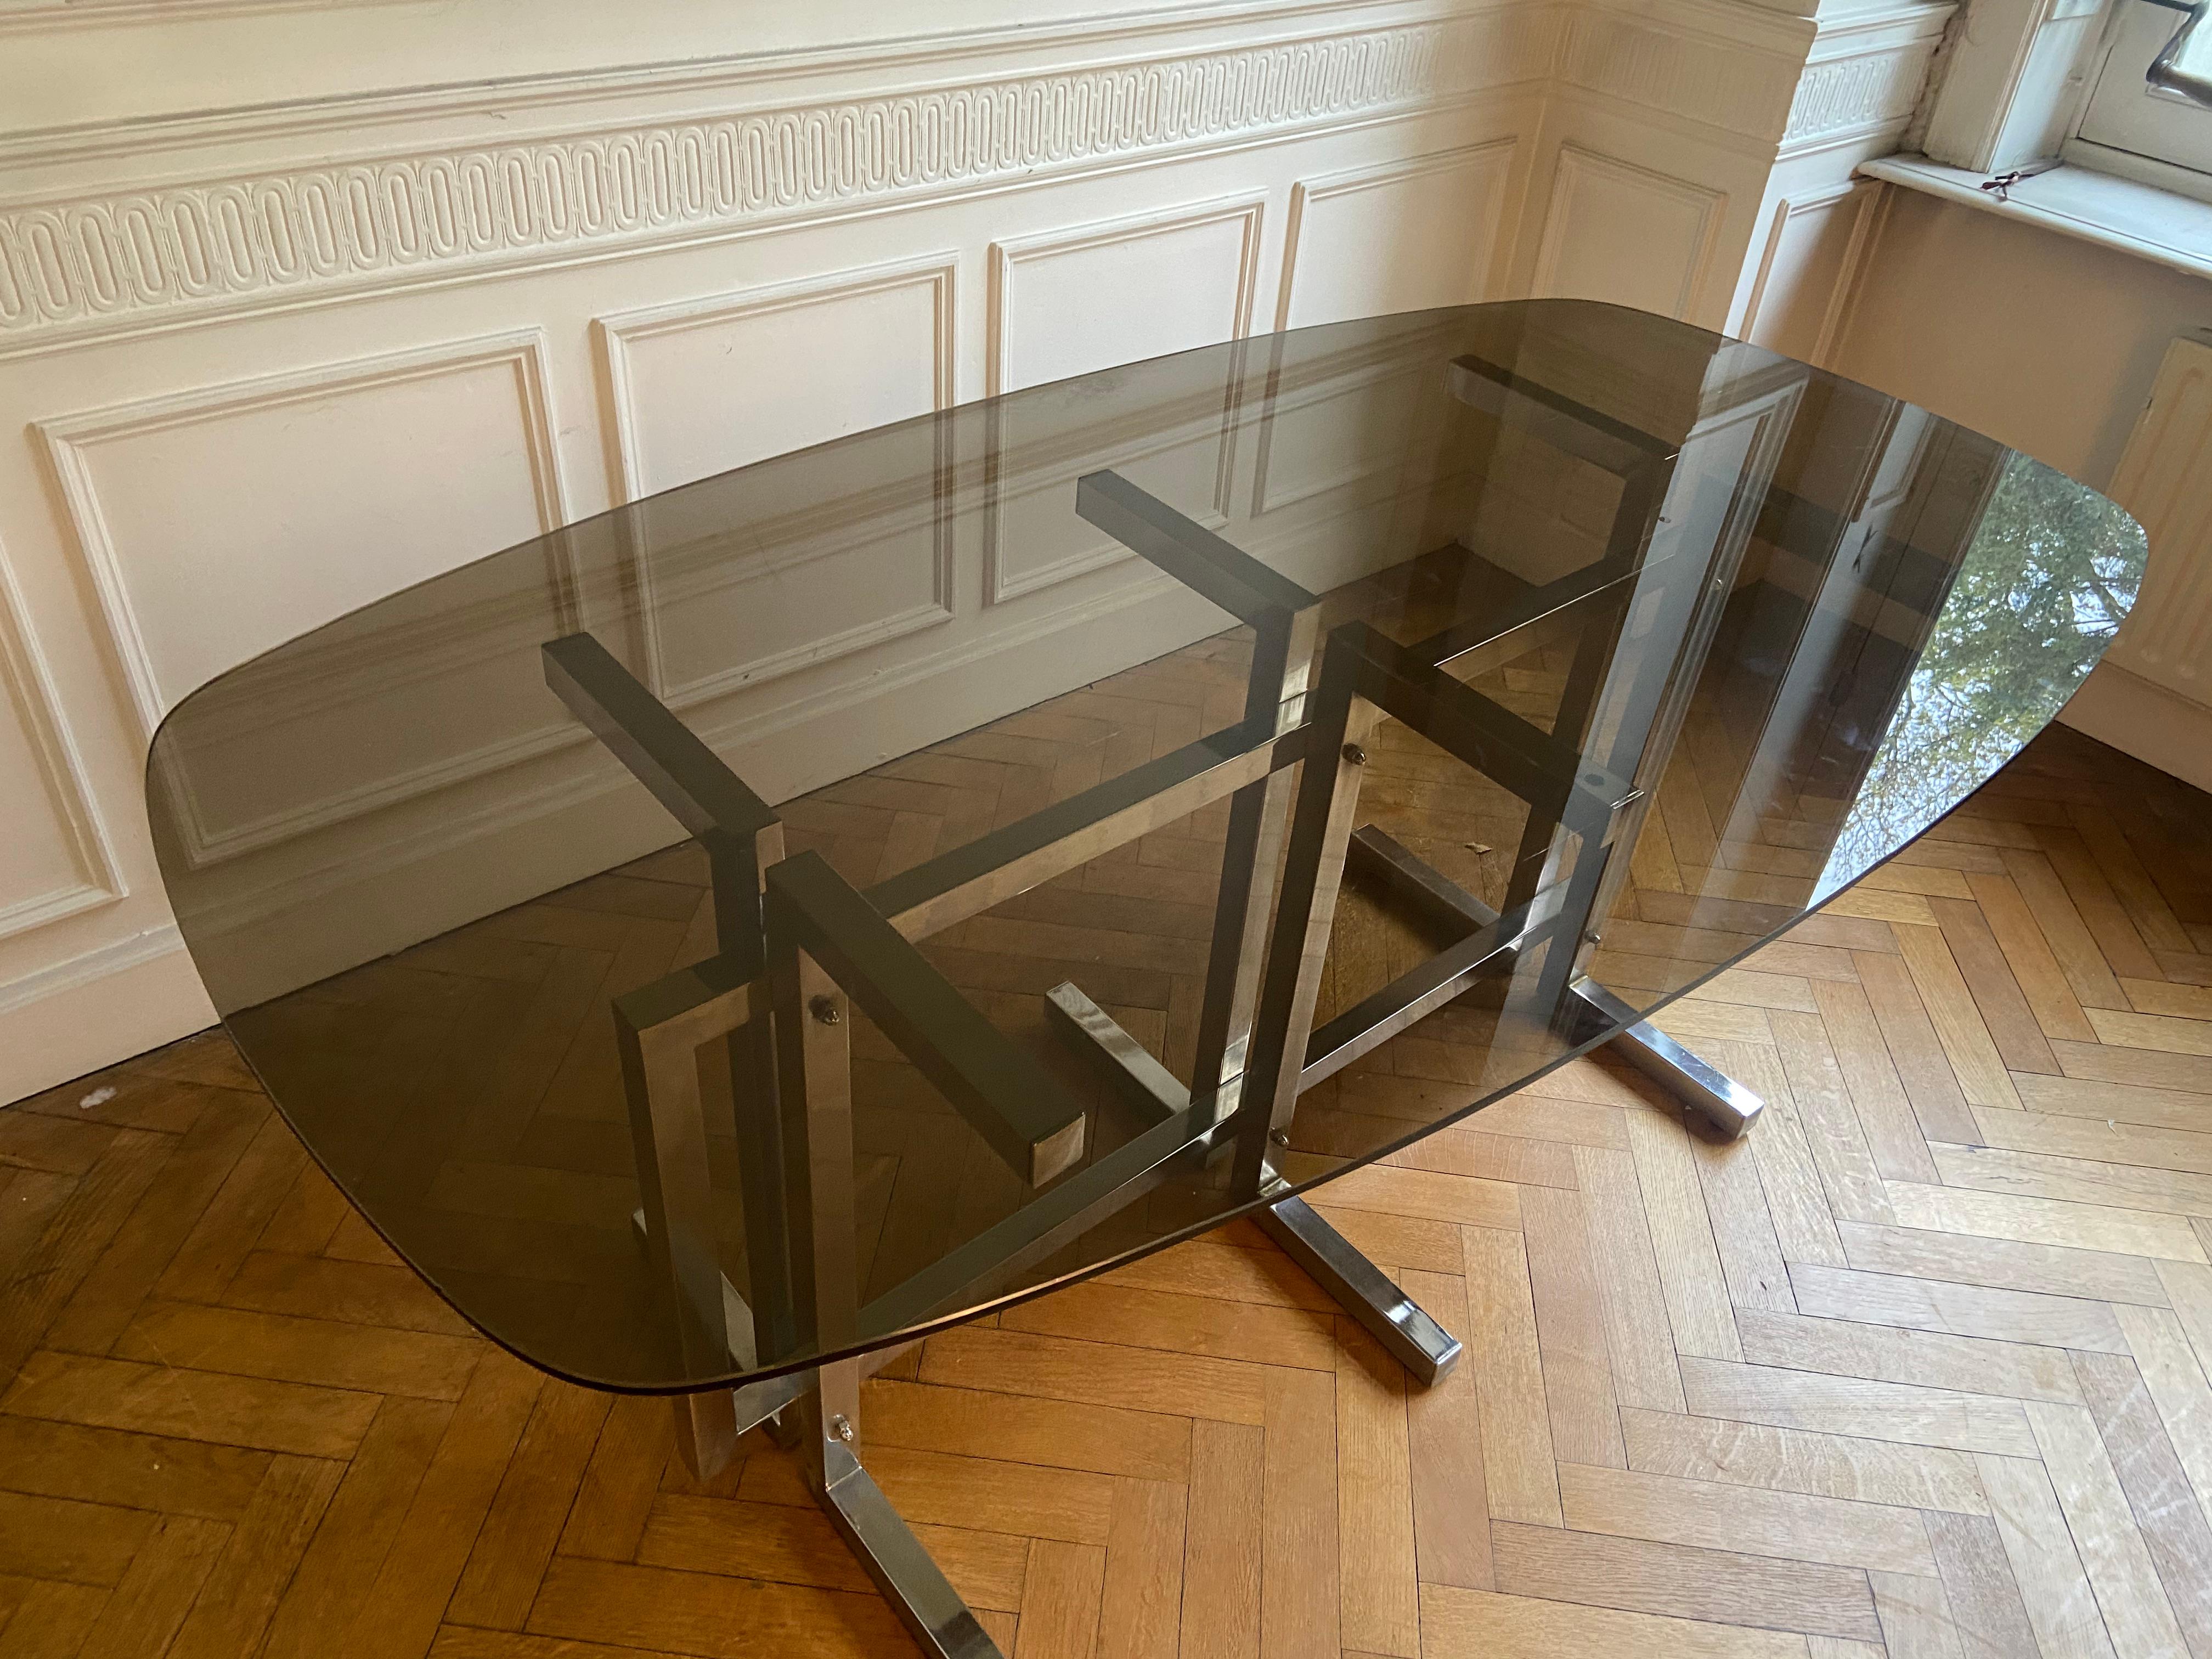 Vintage dining table. Graphic feet in chrome metal. Smoked glass top. 5